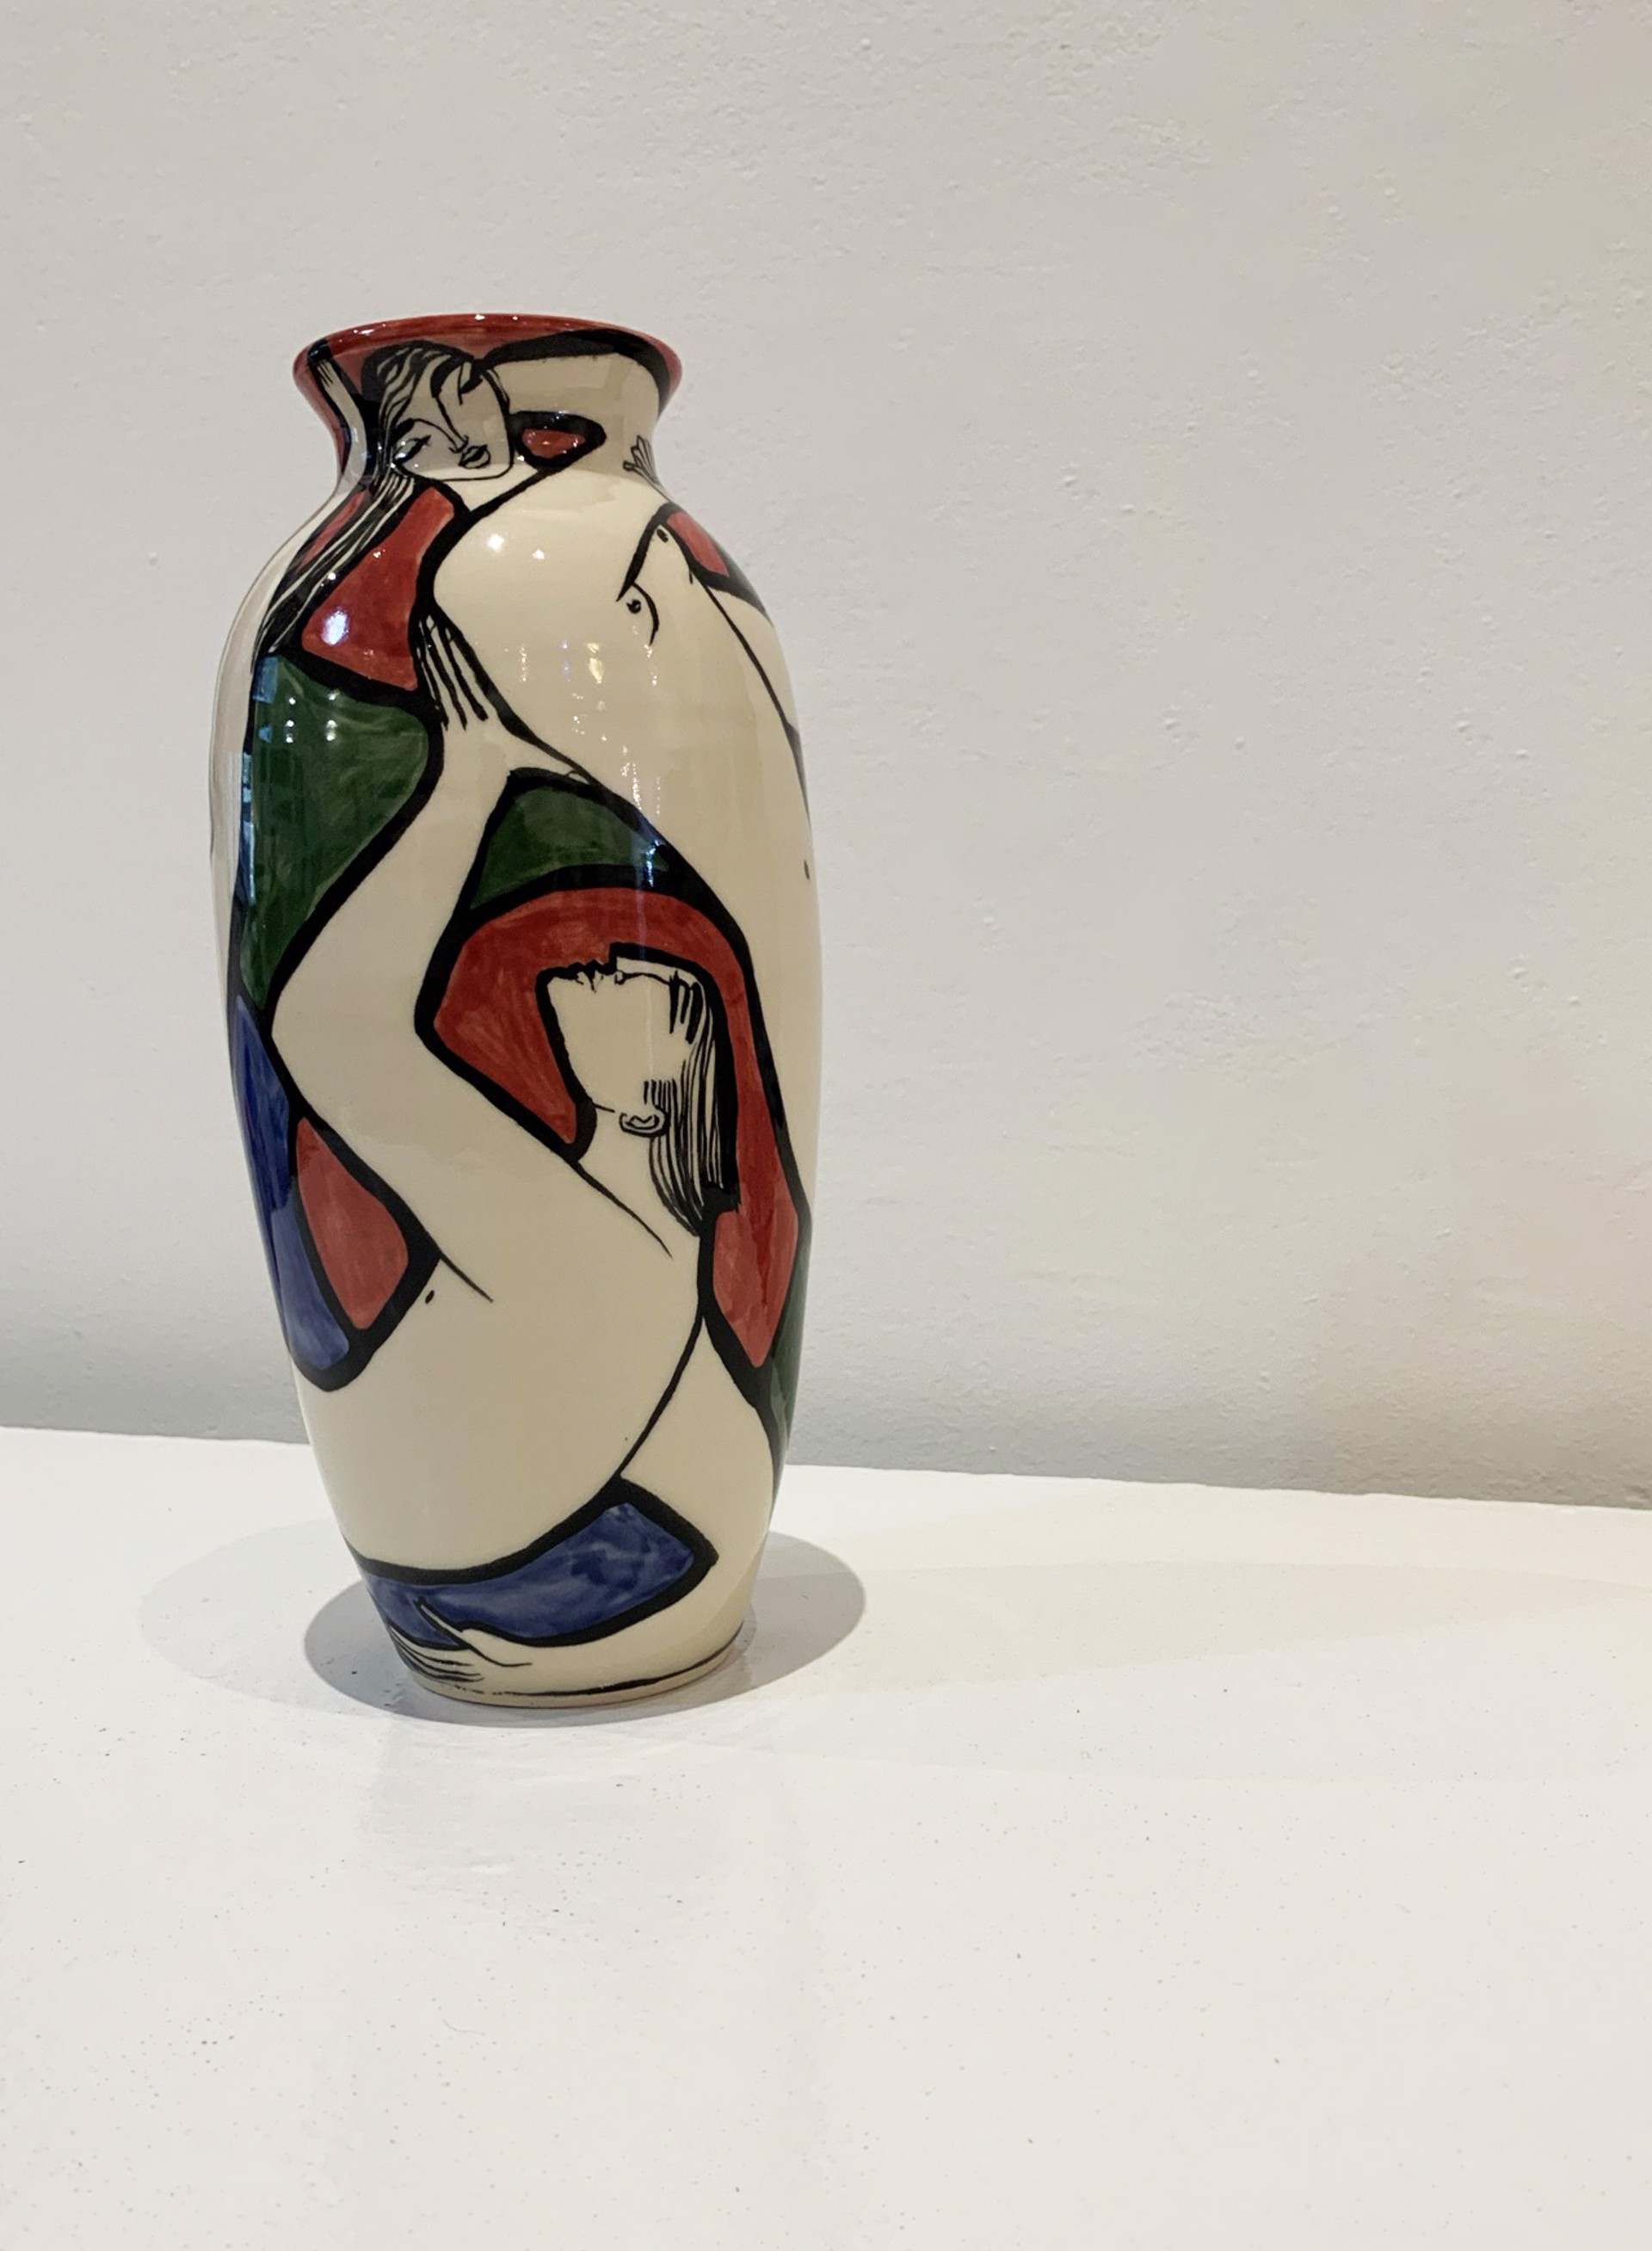 Vase #23 by Ken and Tina Riesterer